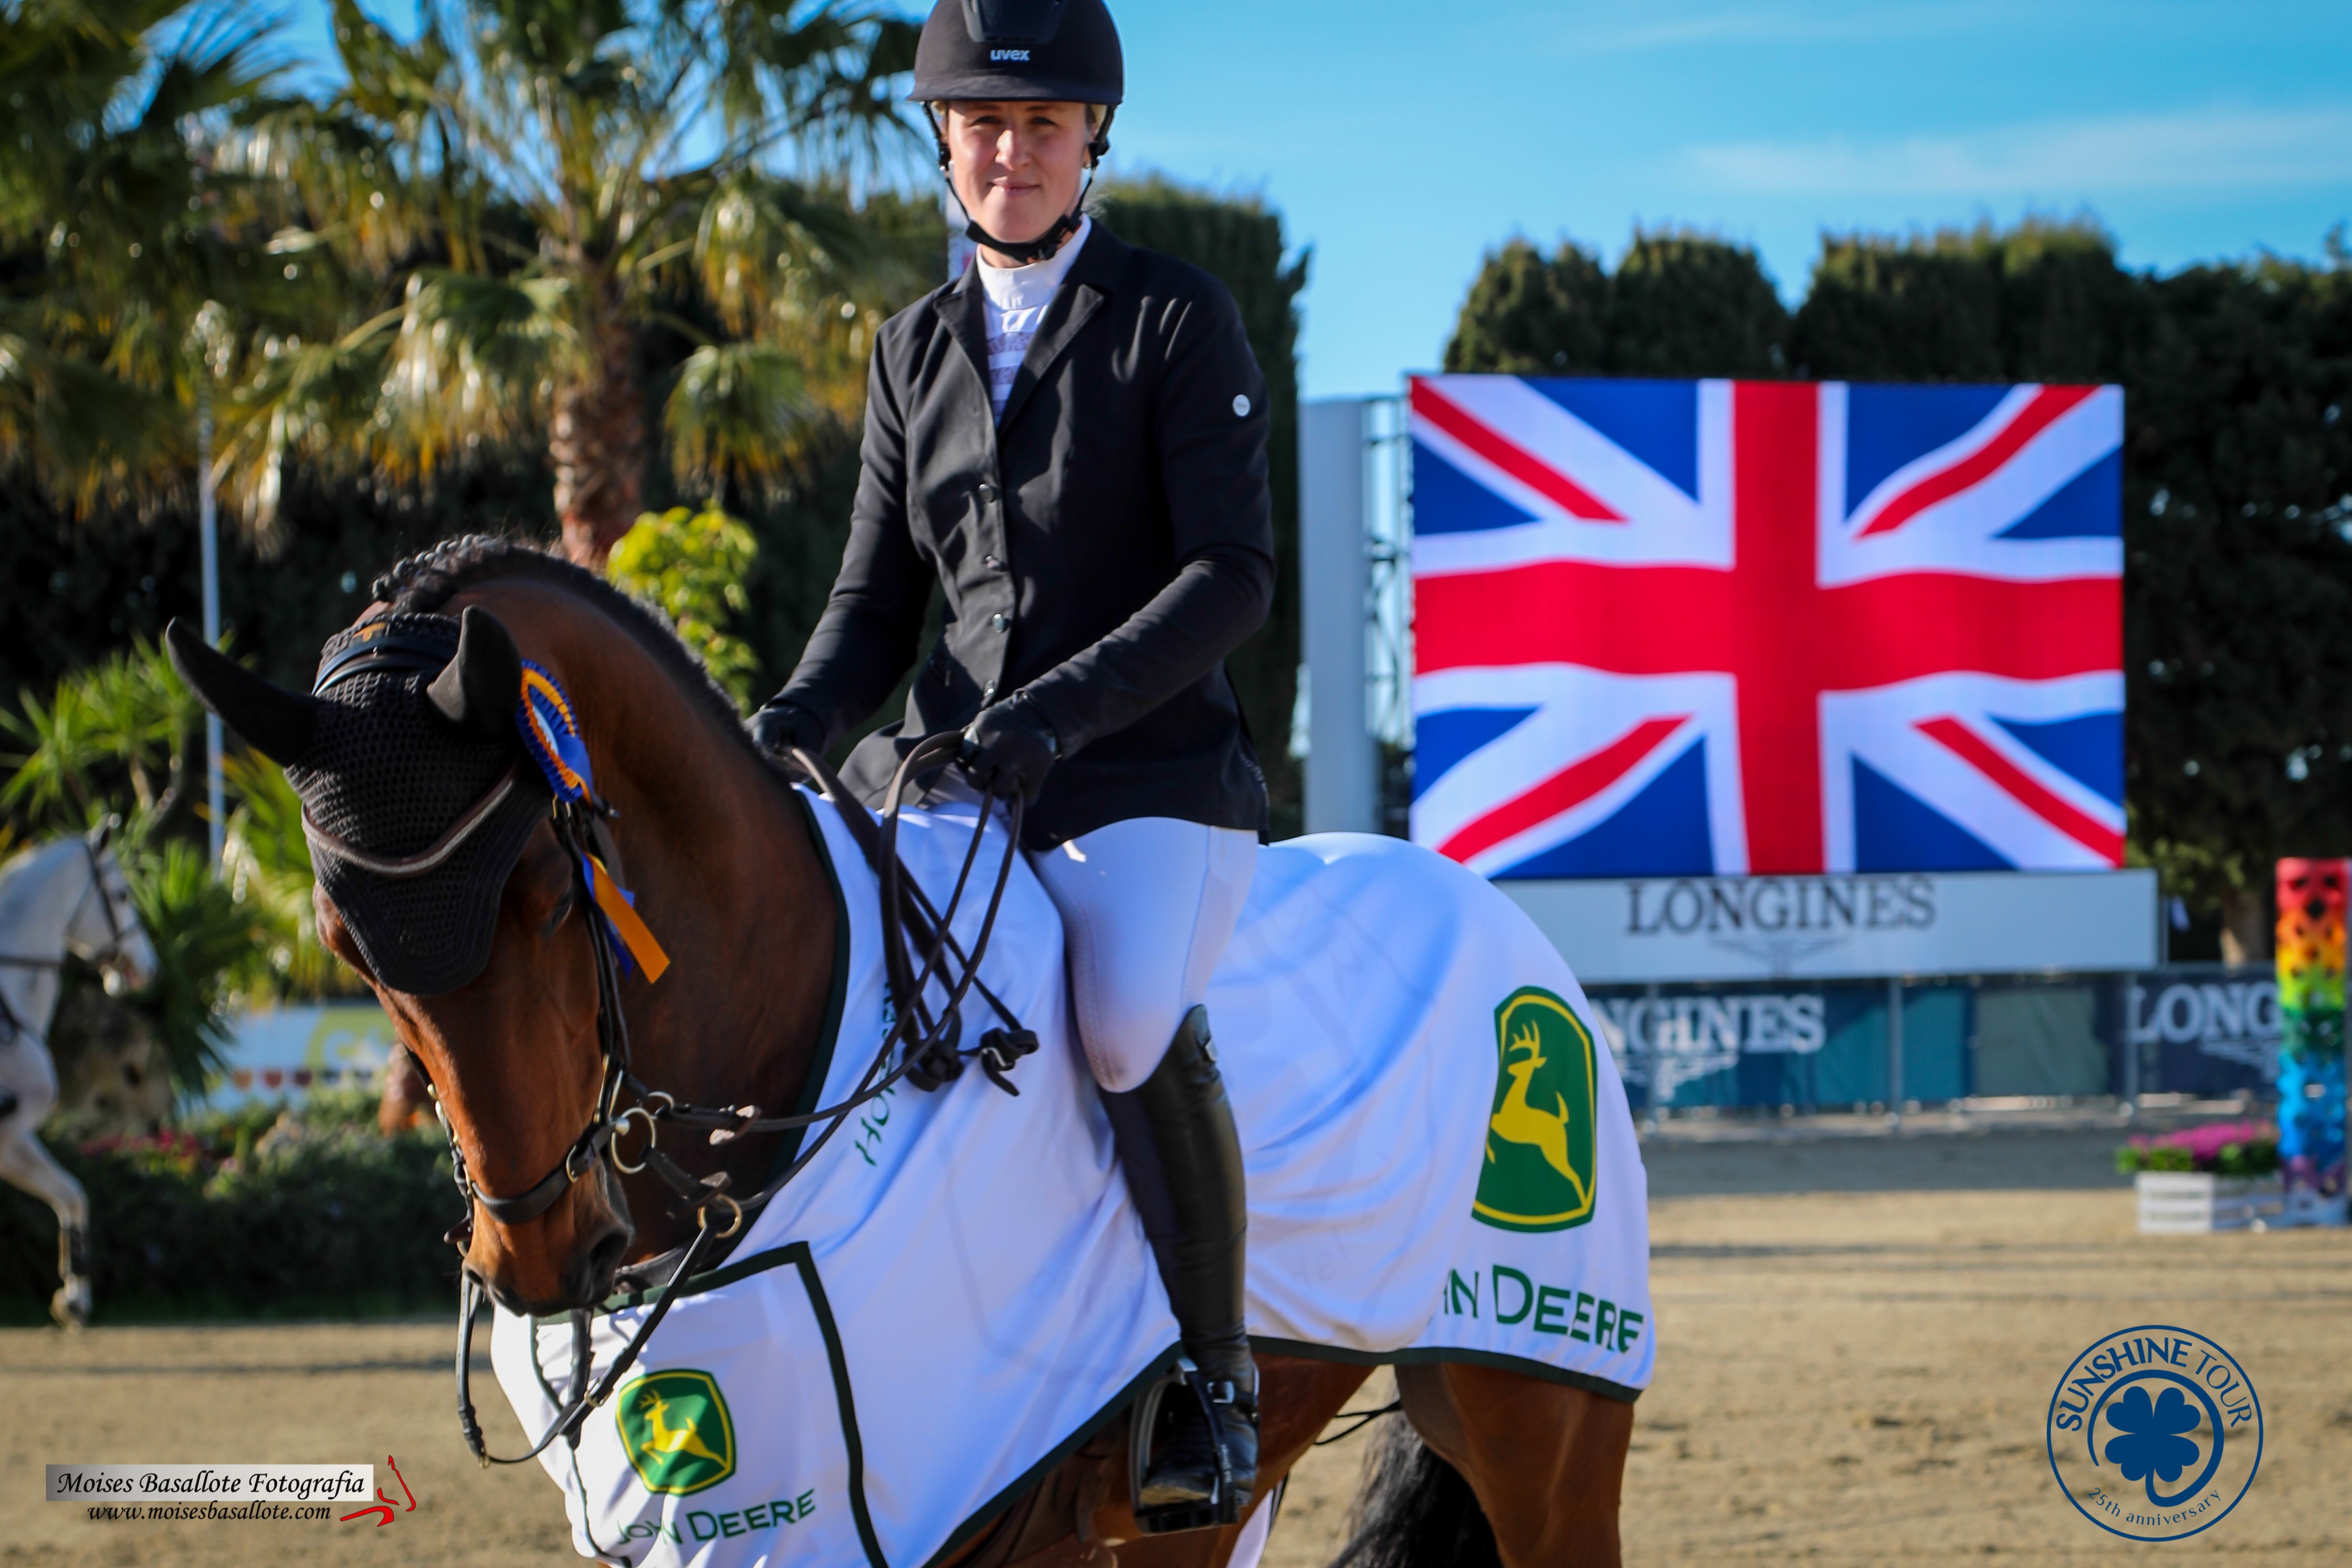 CSI3* Longines Ranking class of Vejer de la Frontera goes to Holly Smith and Denver